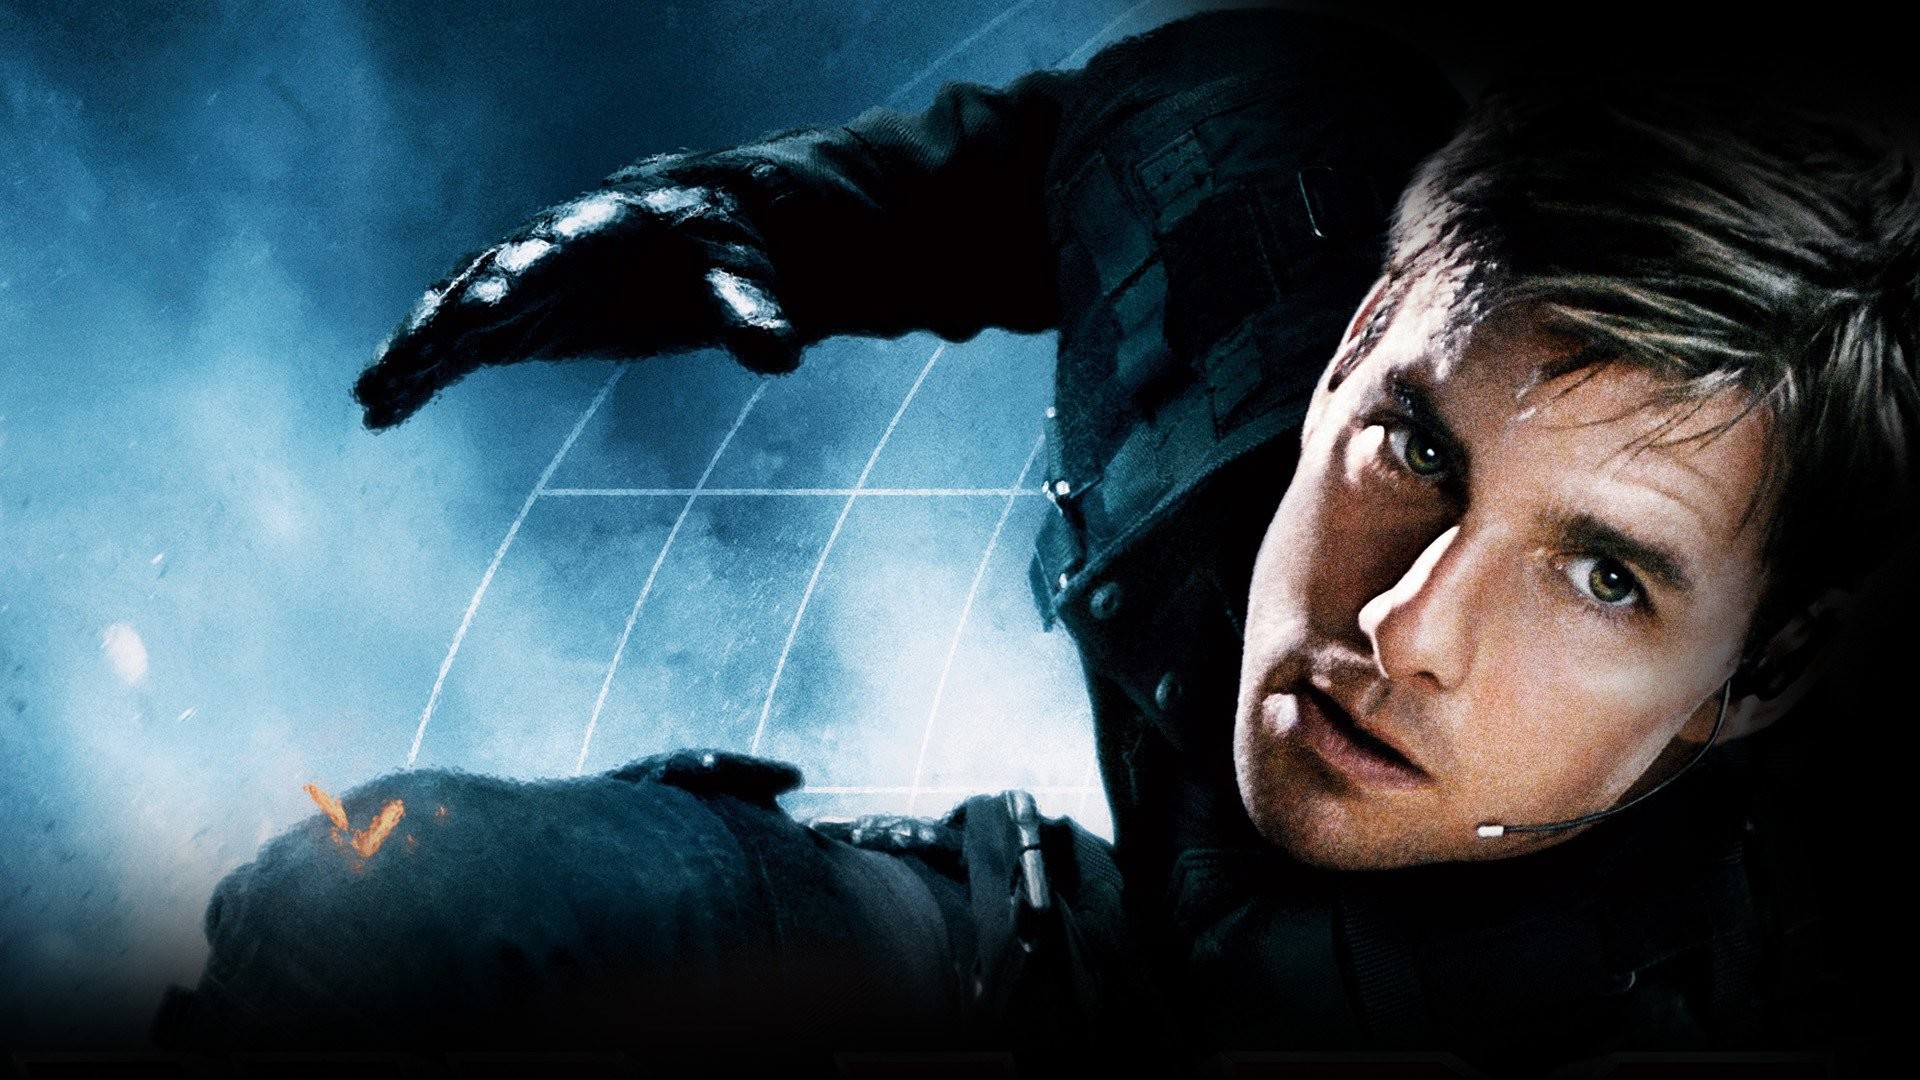 1920x1080 Movie - Mission: Impossible III Wallpaper